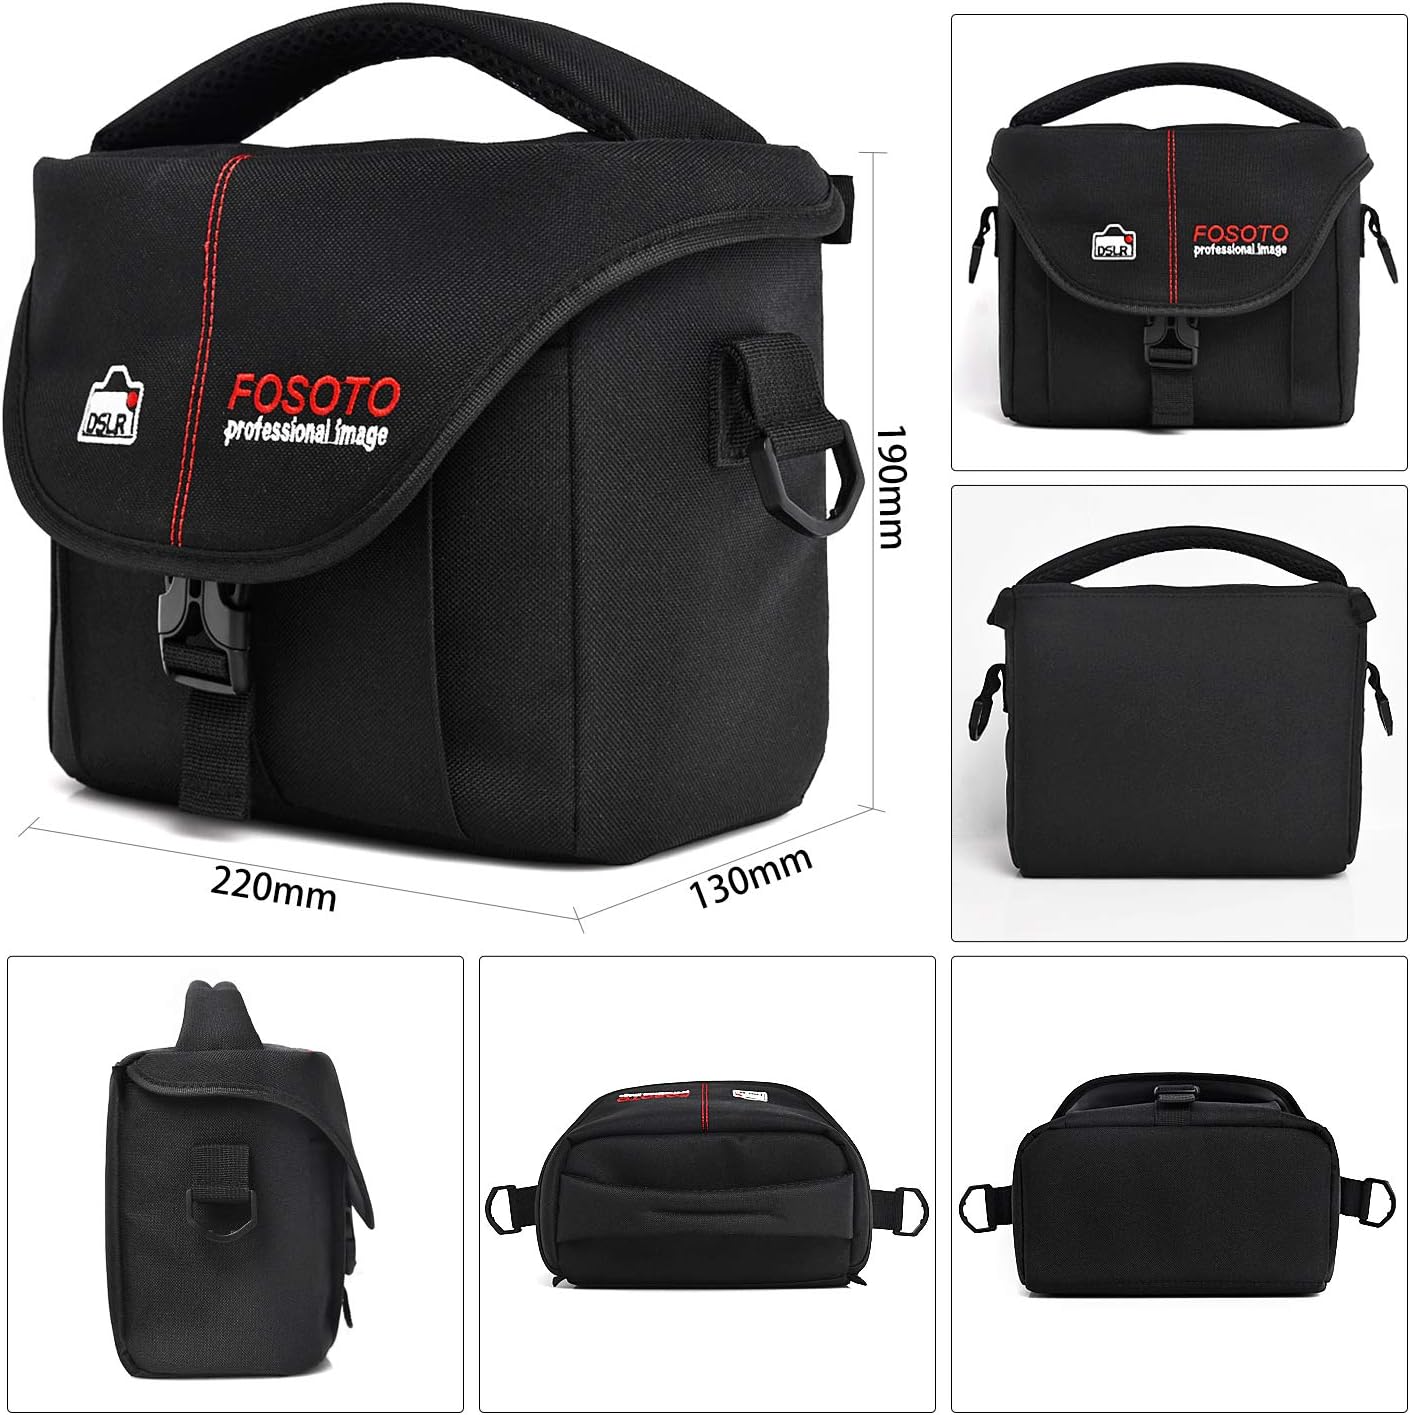 FOSOTO DSLR Camera Case Bag Compatible for Nikon D3400 D5500 D5600 D7200 D810 D750 D610 D60,Canon EOS T3 T4i T5i T6 T7 T7i SL1,Fuji X-T3 and more